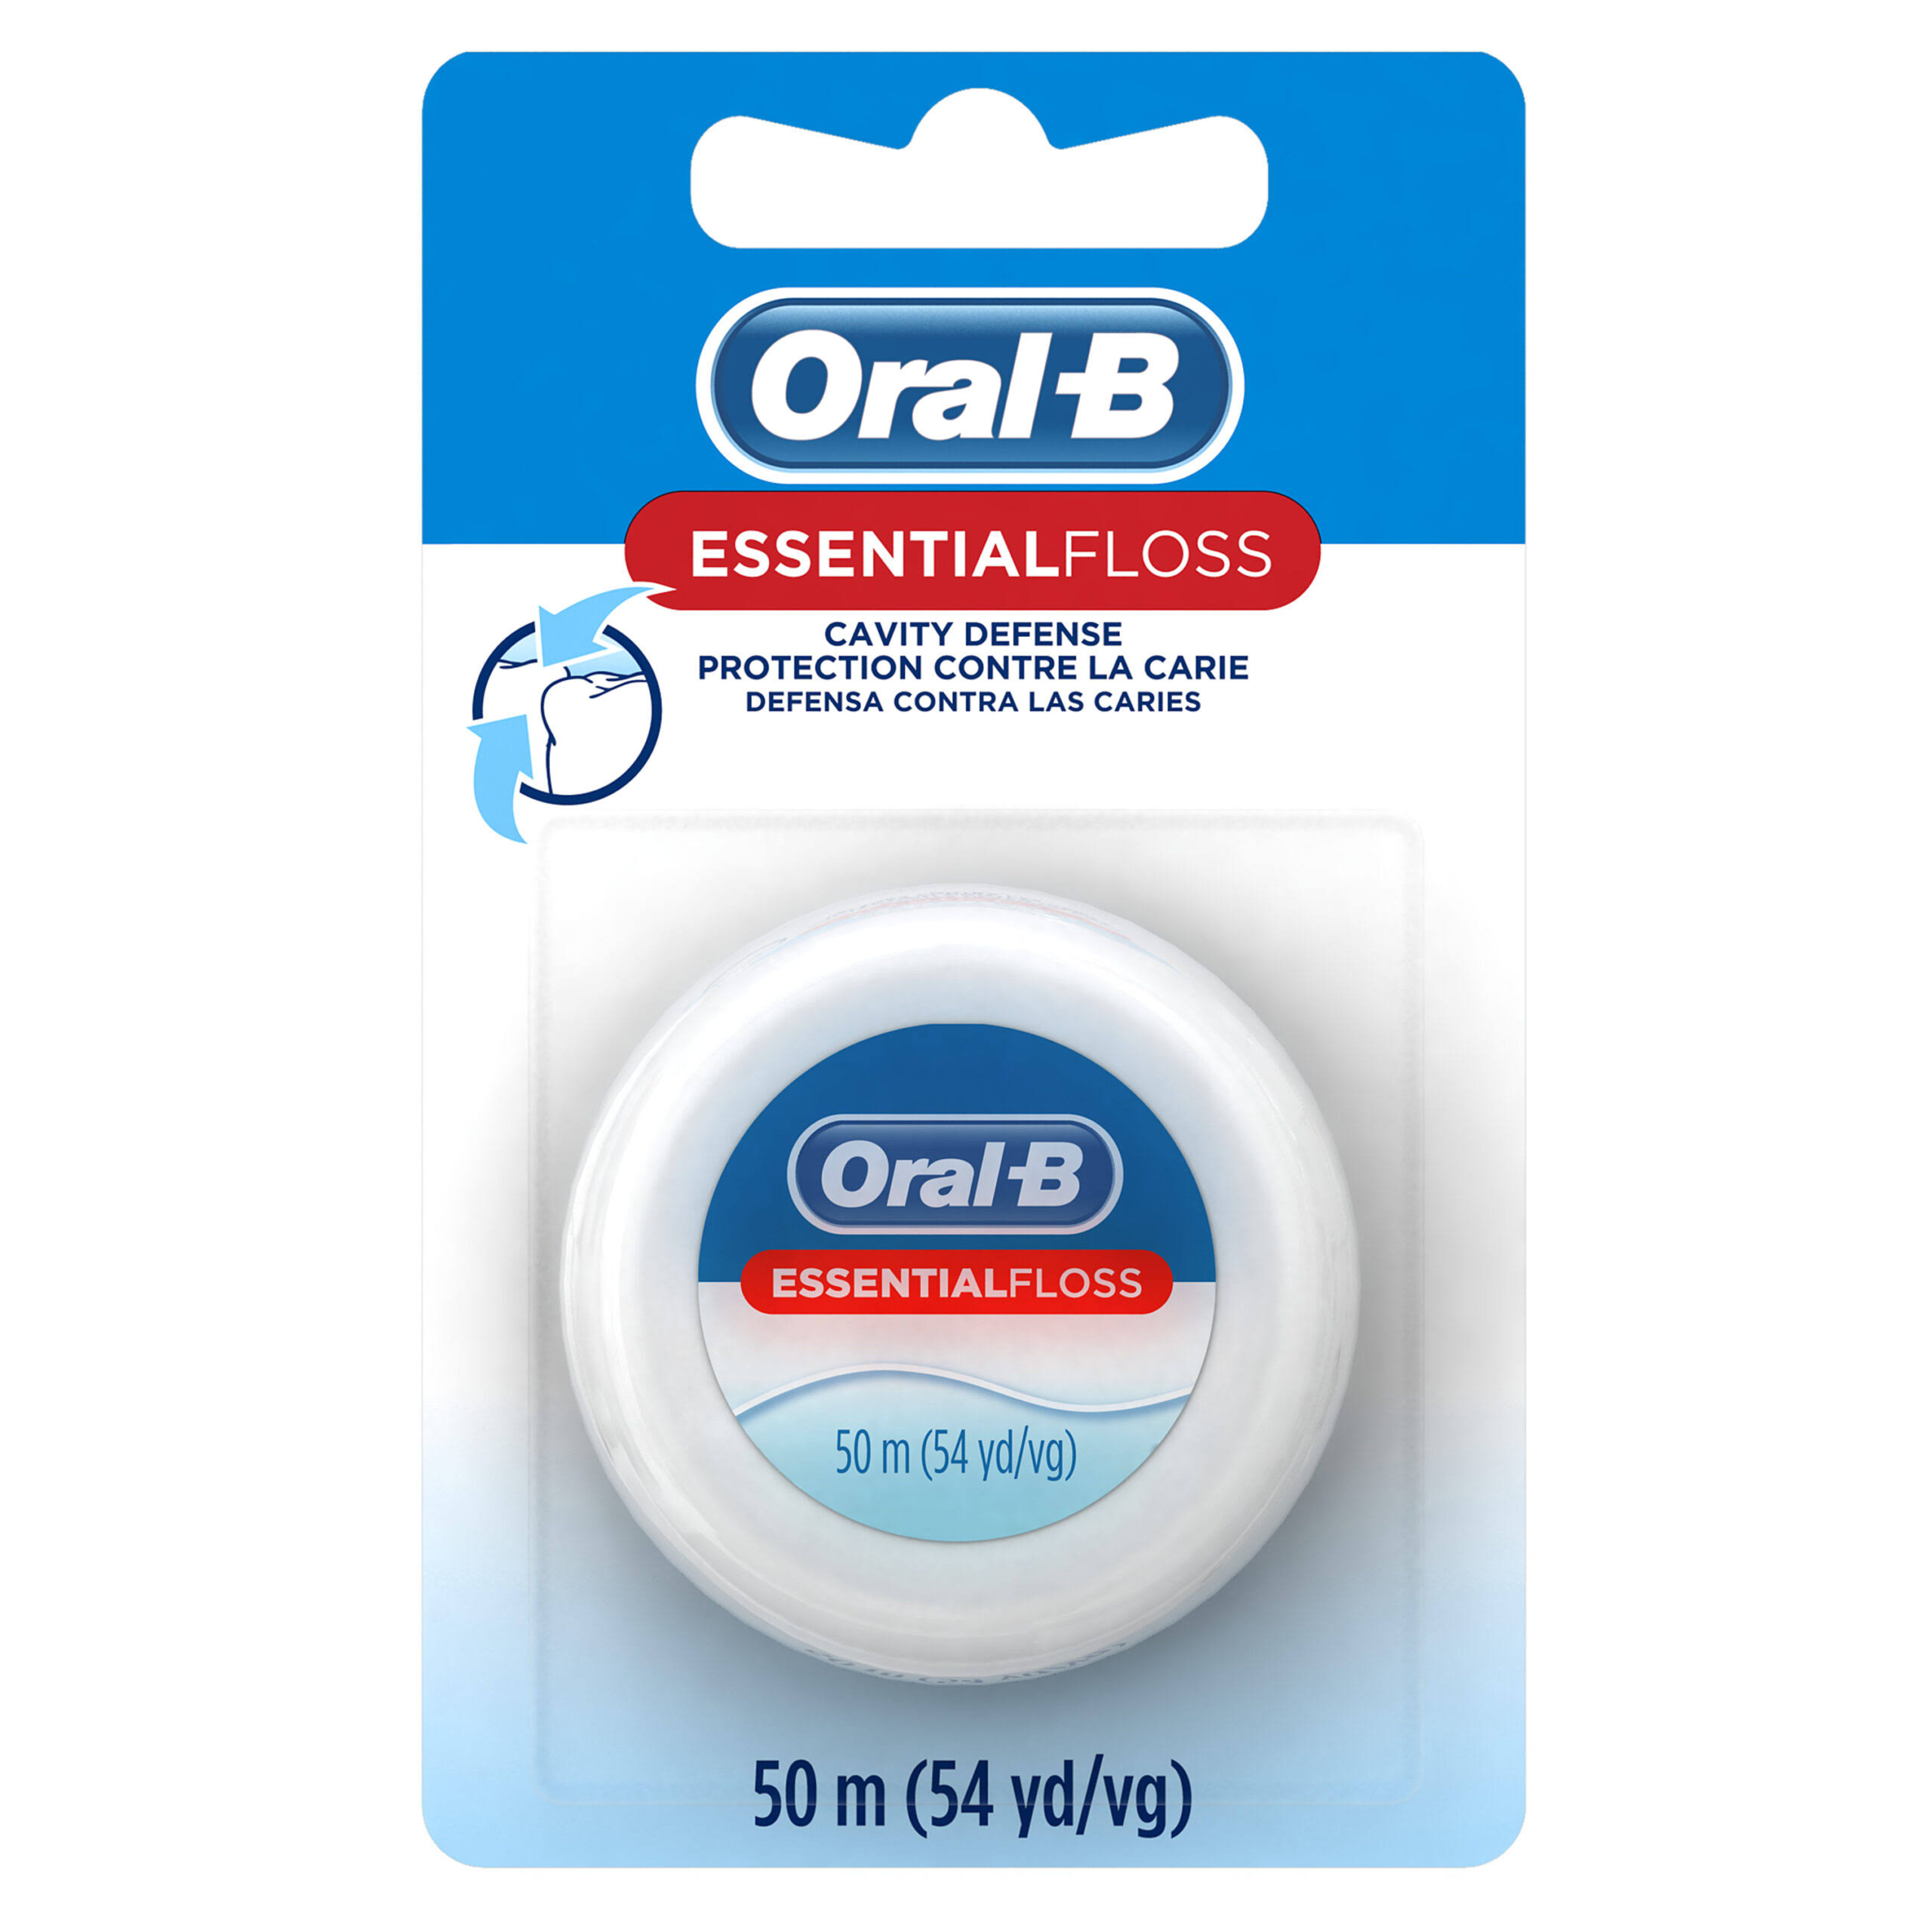 Oral-B Essential Floss - 54yds, Pack of 24